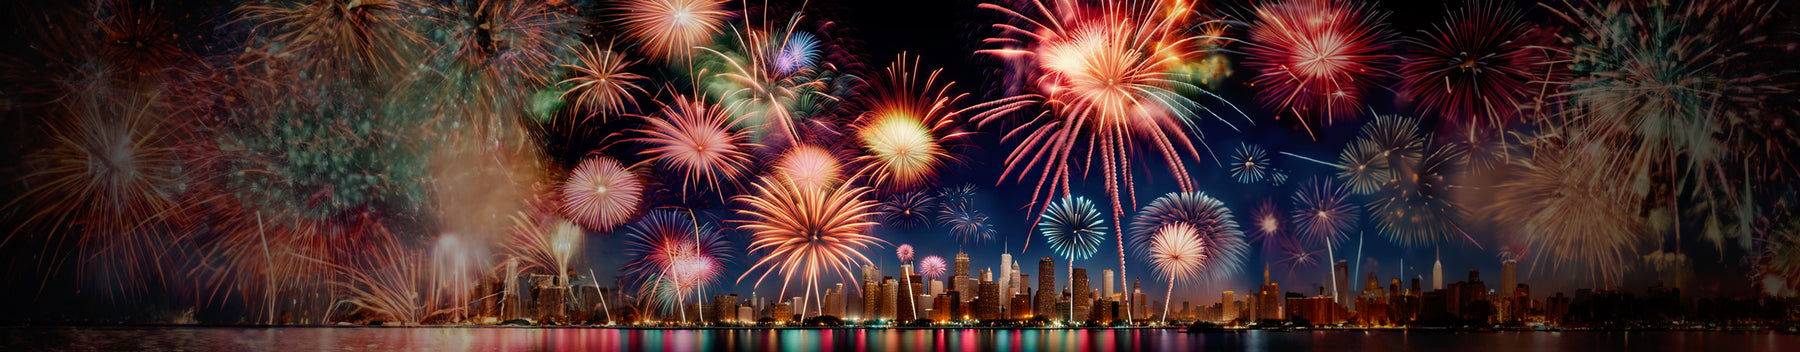 New Year's Eve Fireworks at Sheikh Zayed Festival Set to Break 4 World Records